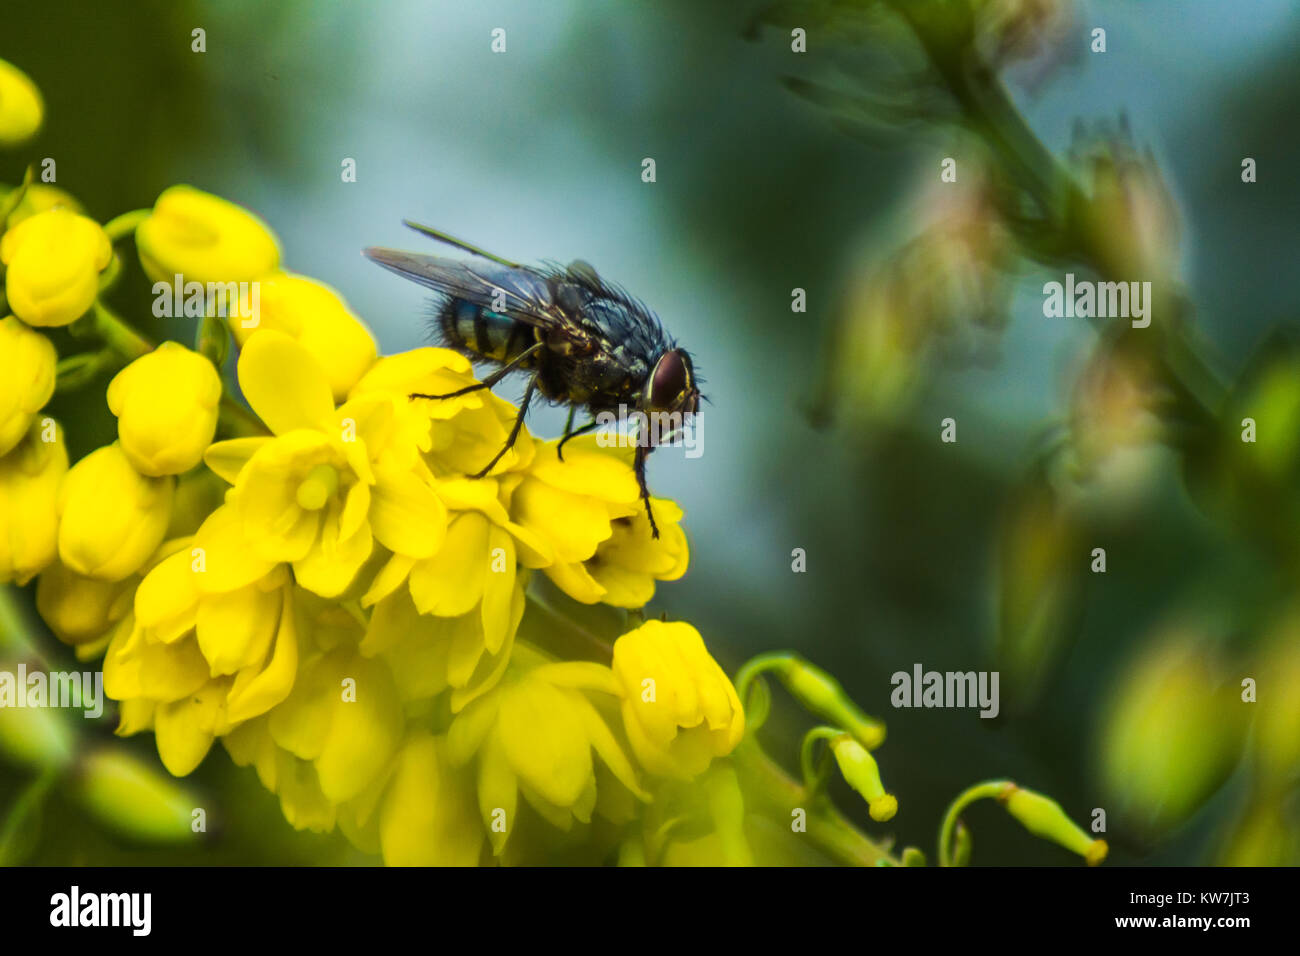 Housefly sitting on flowers. Stock Photo